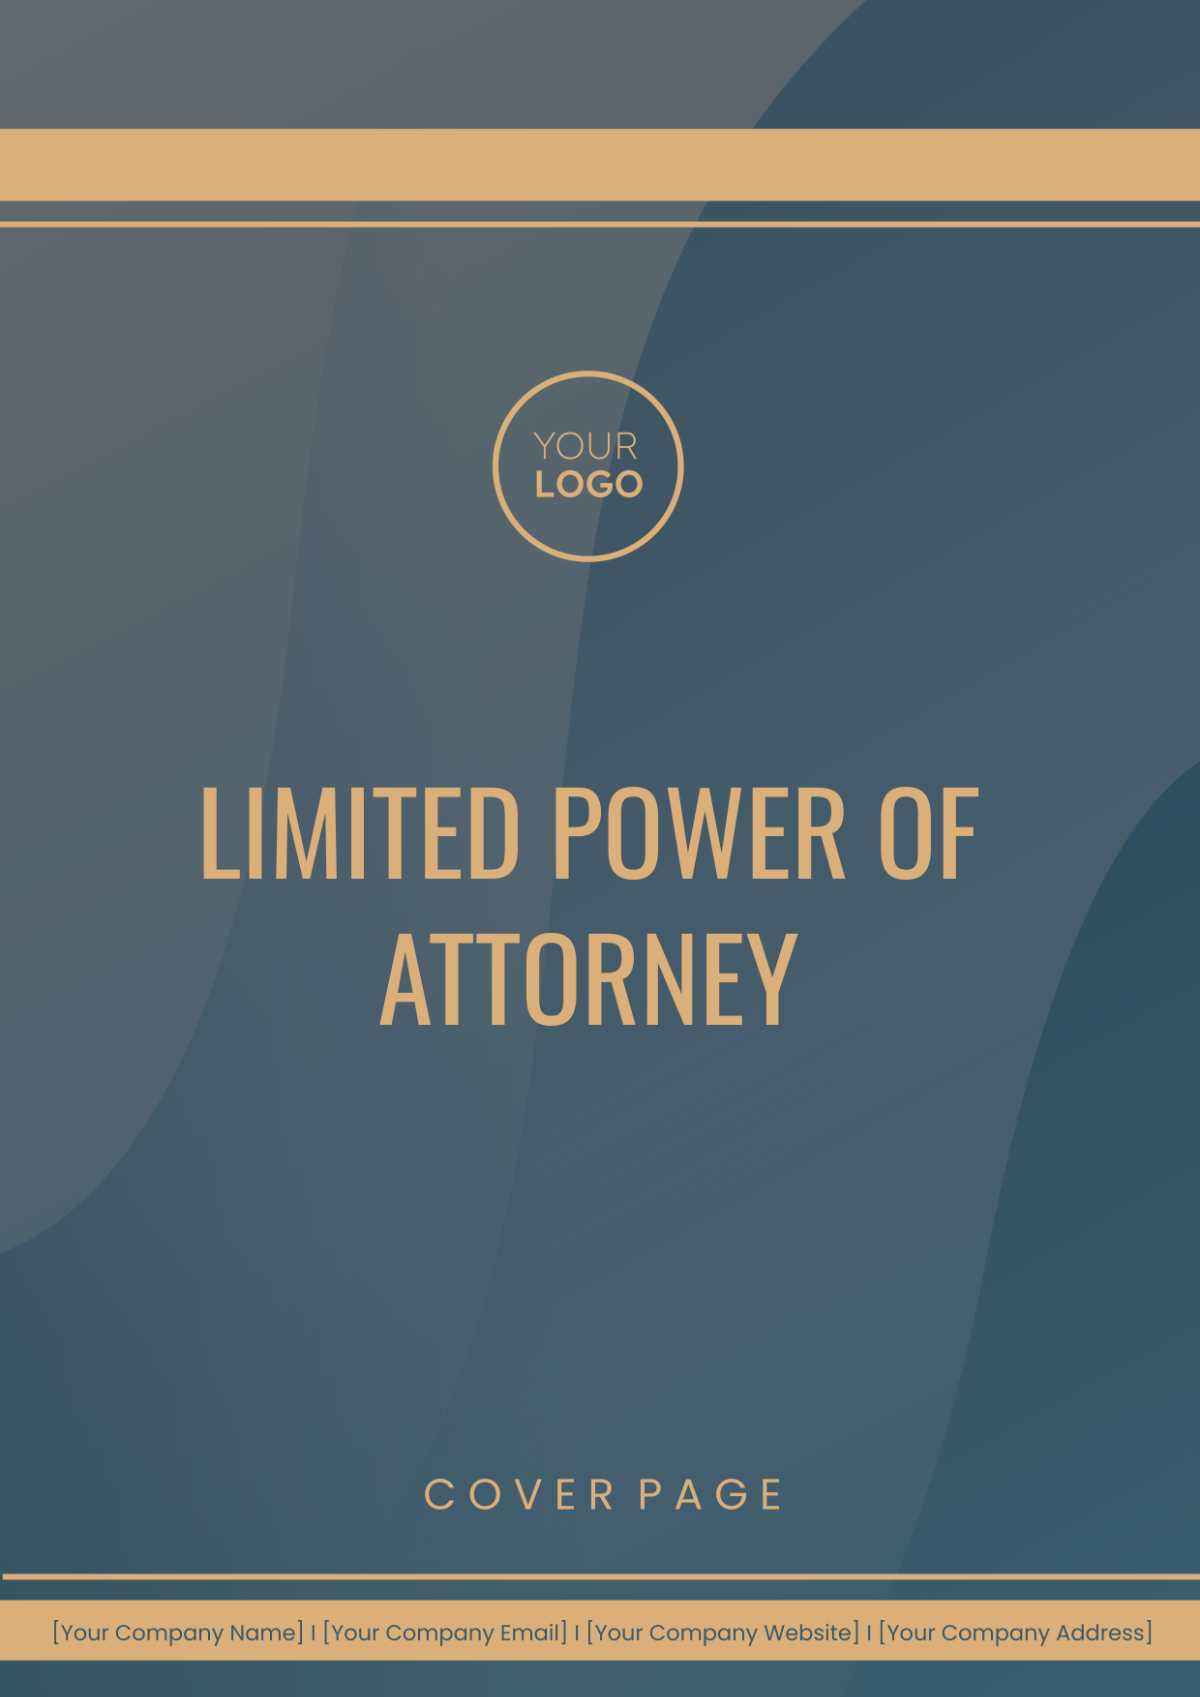 Limited Power of Attorney Cover Page